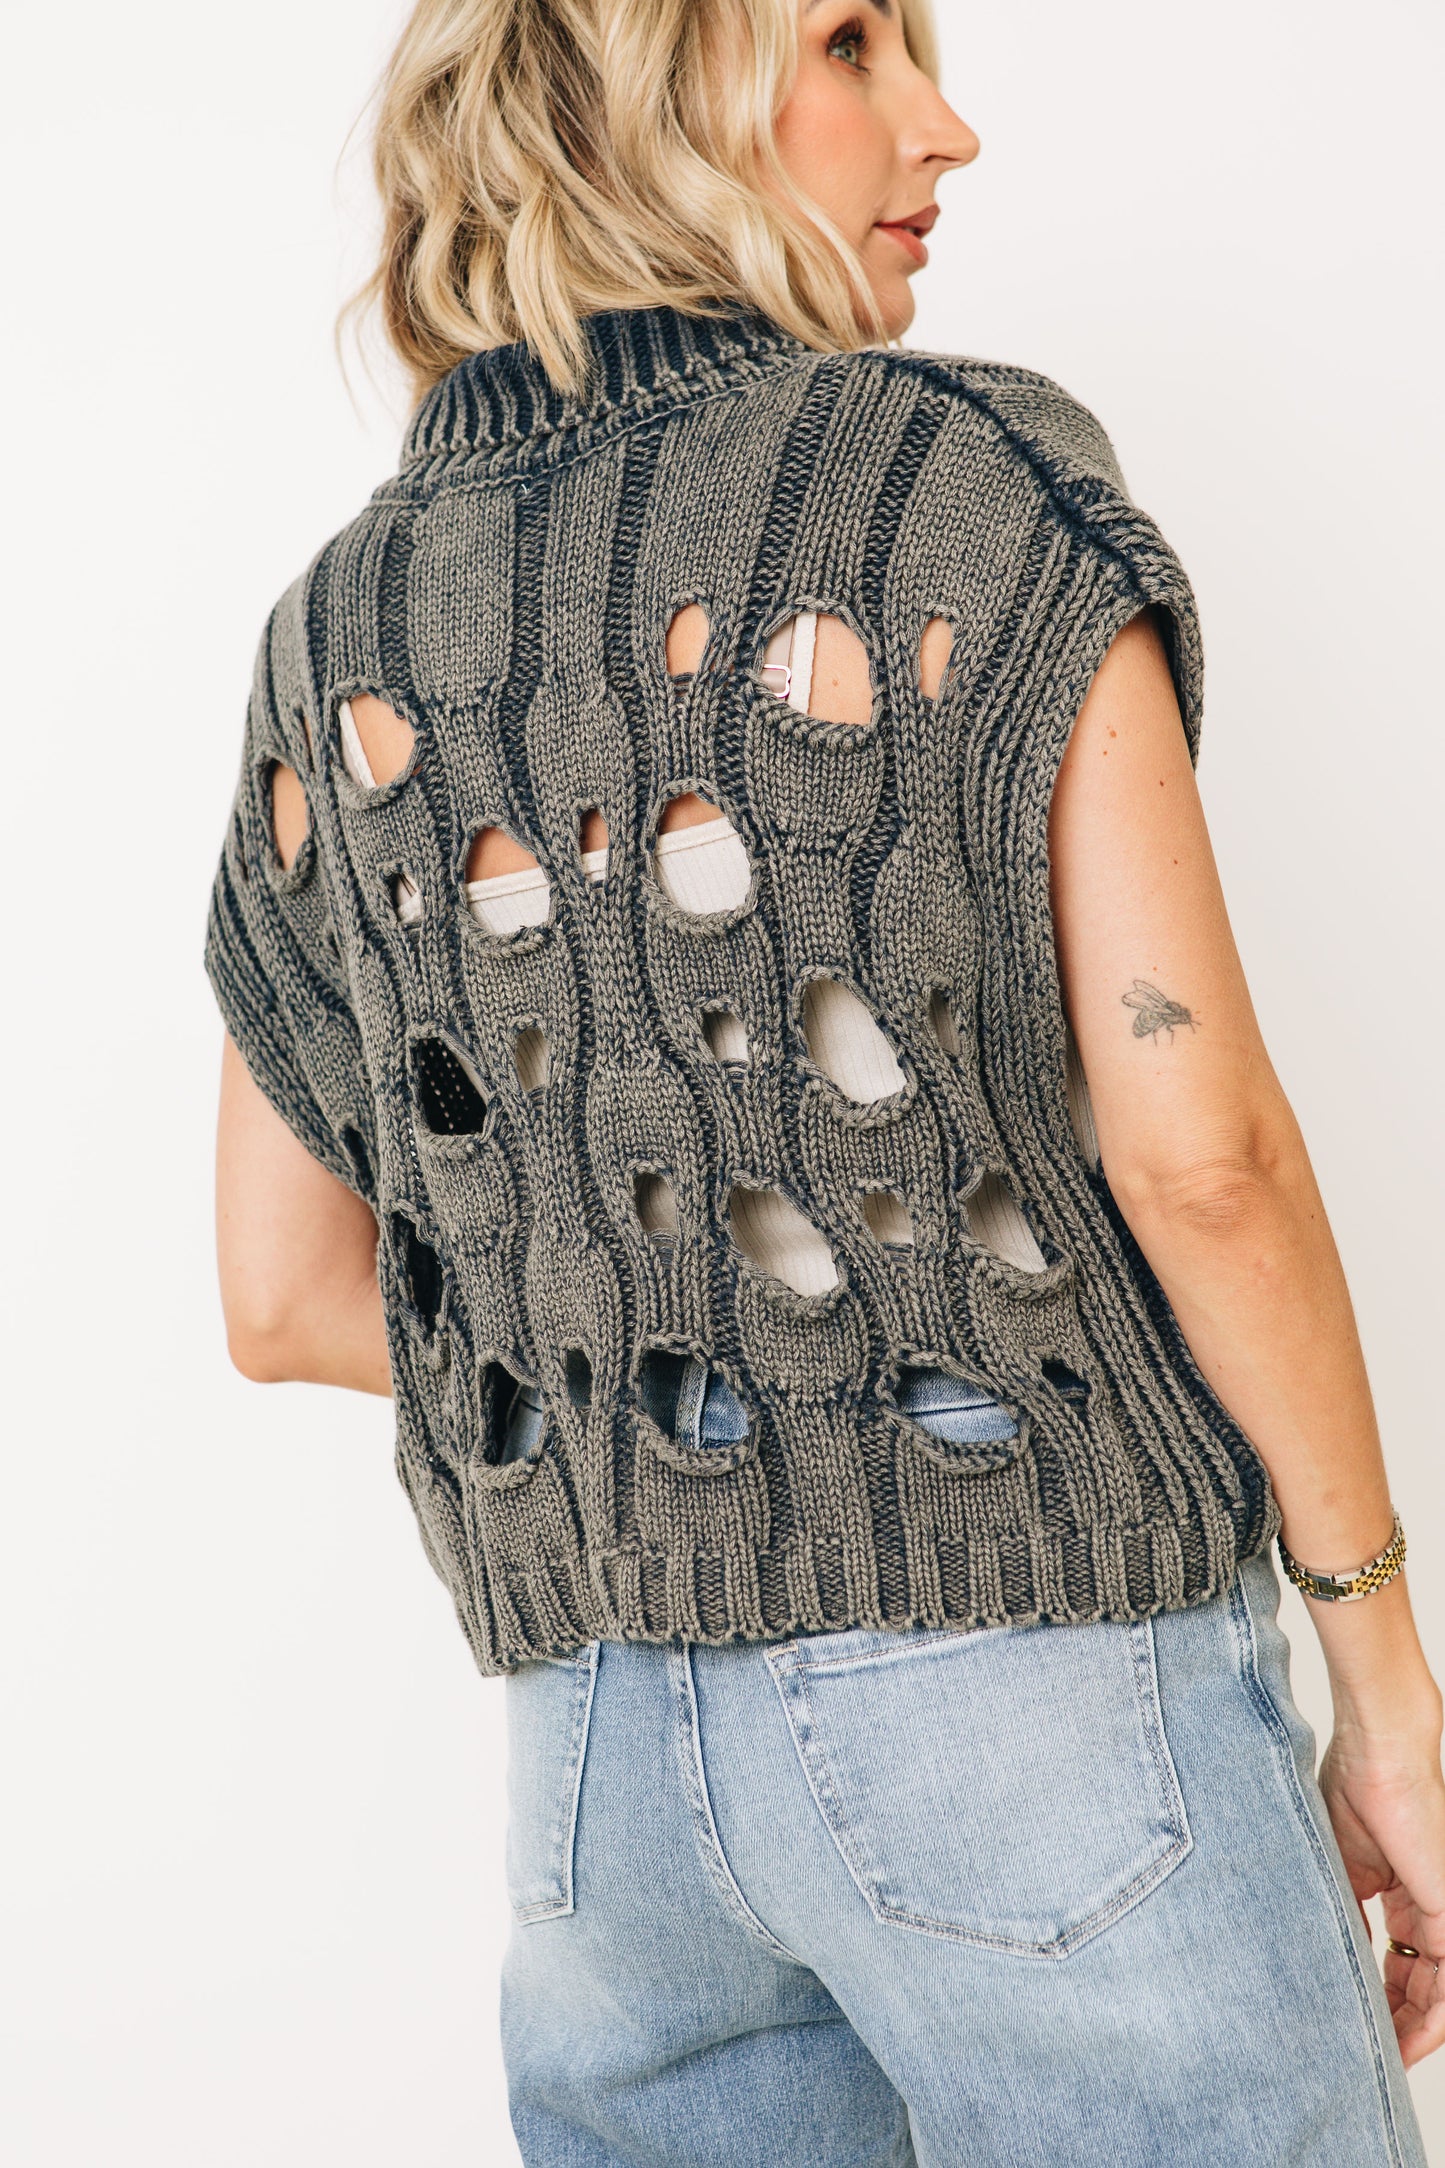 RESTOCK EXPECTED 10/2 - Distressed Mineral Washed Sweater Vest (S-XL)